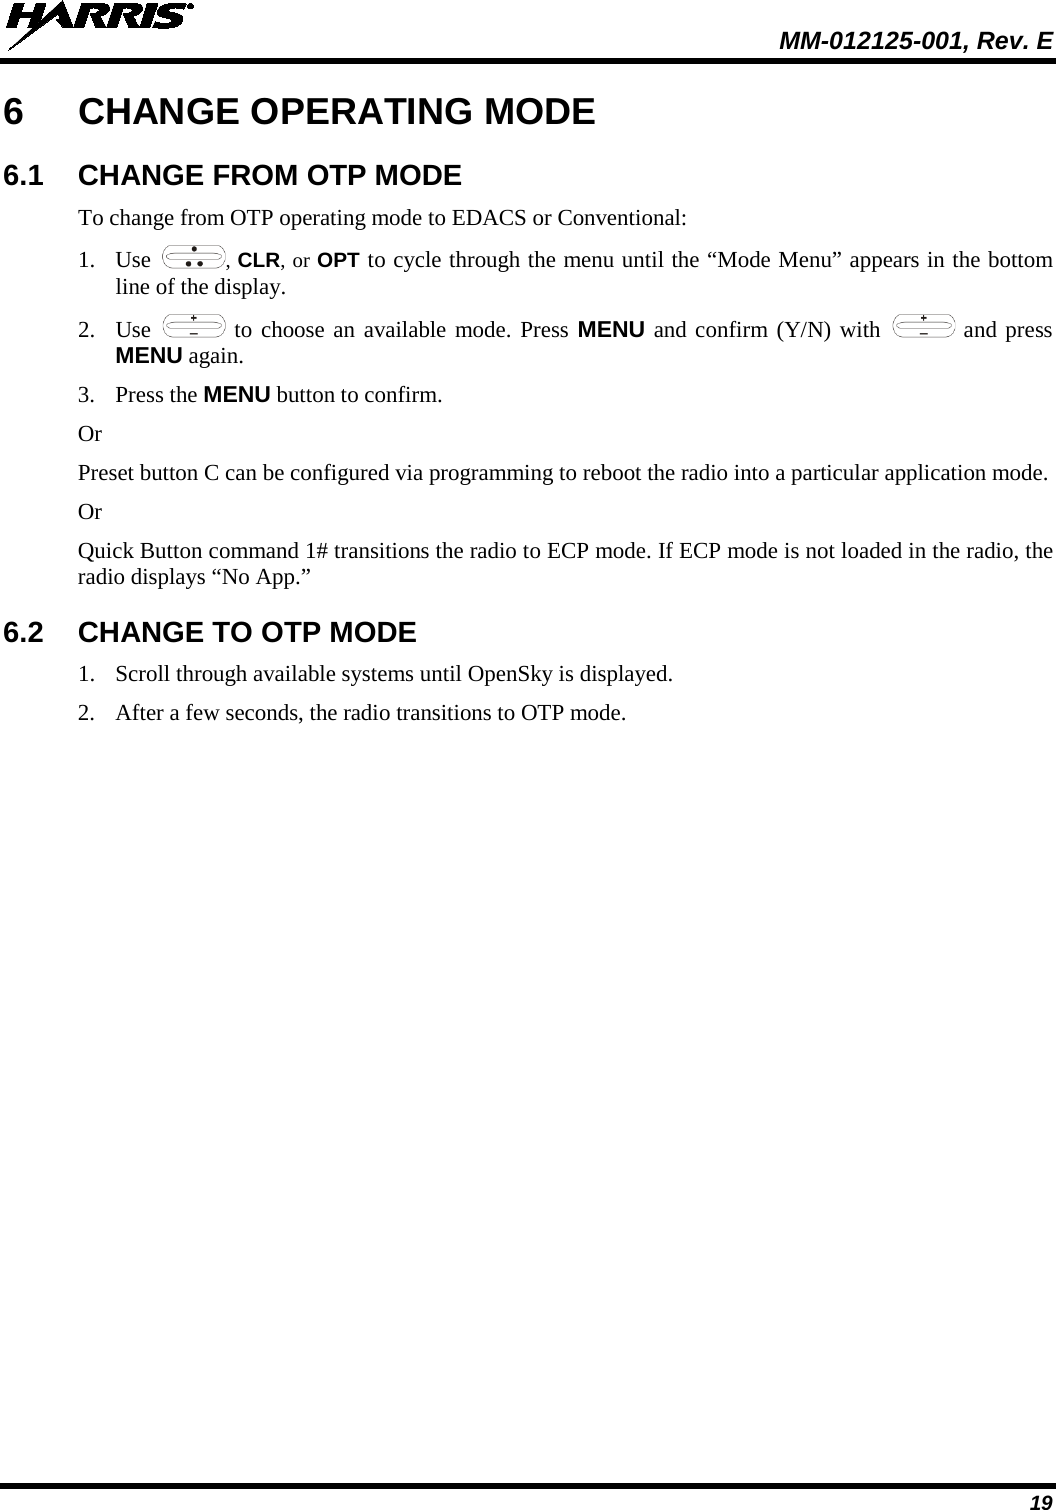  MM-012125-001, Rev. E 19 6  CHANGE OPERATING MODE 6.1 CHANGE FROM OTP MODE To change from OTP operating mode to EDACS or Conventional: 1. Use  , CLR, or OPT to cycle through the menu until the “Mode Menu” appears in the bottom line of the display. 2. Use   to choose an available mode. Press MENU and confirm (Y/N) with   and press MENU again. 3. Press the MENU button to confirm.  Or Preset button C can be configured via programming to reboot the radio into a particular application mode. Or Quick Button command 1# transitions the radio to ECP mode. If ECP mode is not loaded in the radio, the radio displays “No App.” 6.2 CHANGE TO OTP MODE 1. Scroll through available systems until OpenSky is displayed.  2. After a few seconds, the radio transitions to OTP mode. 